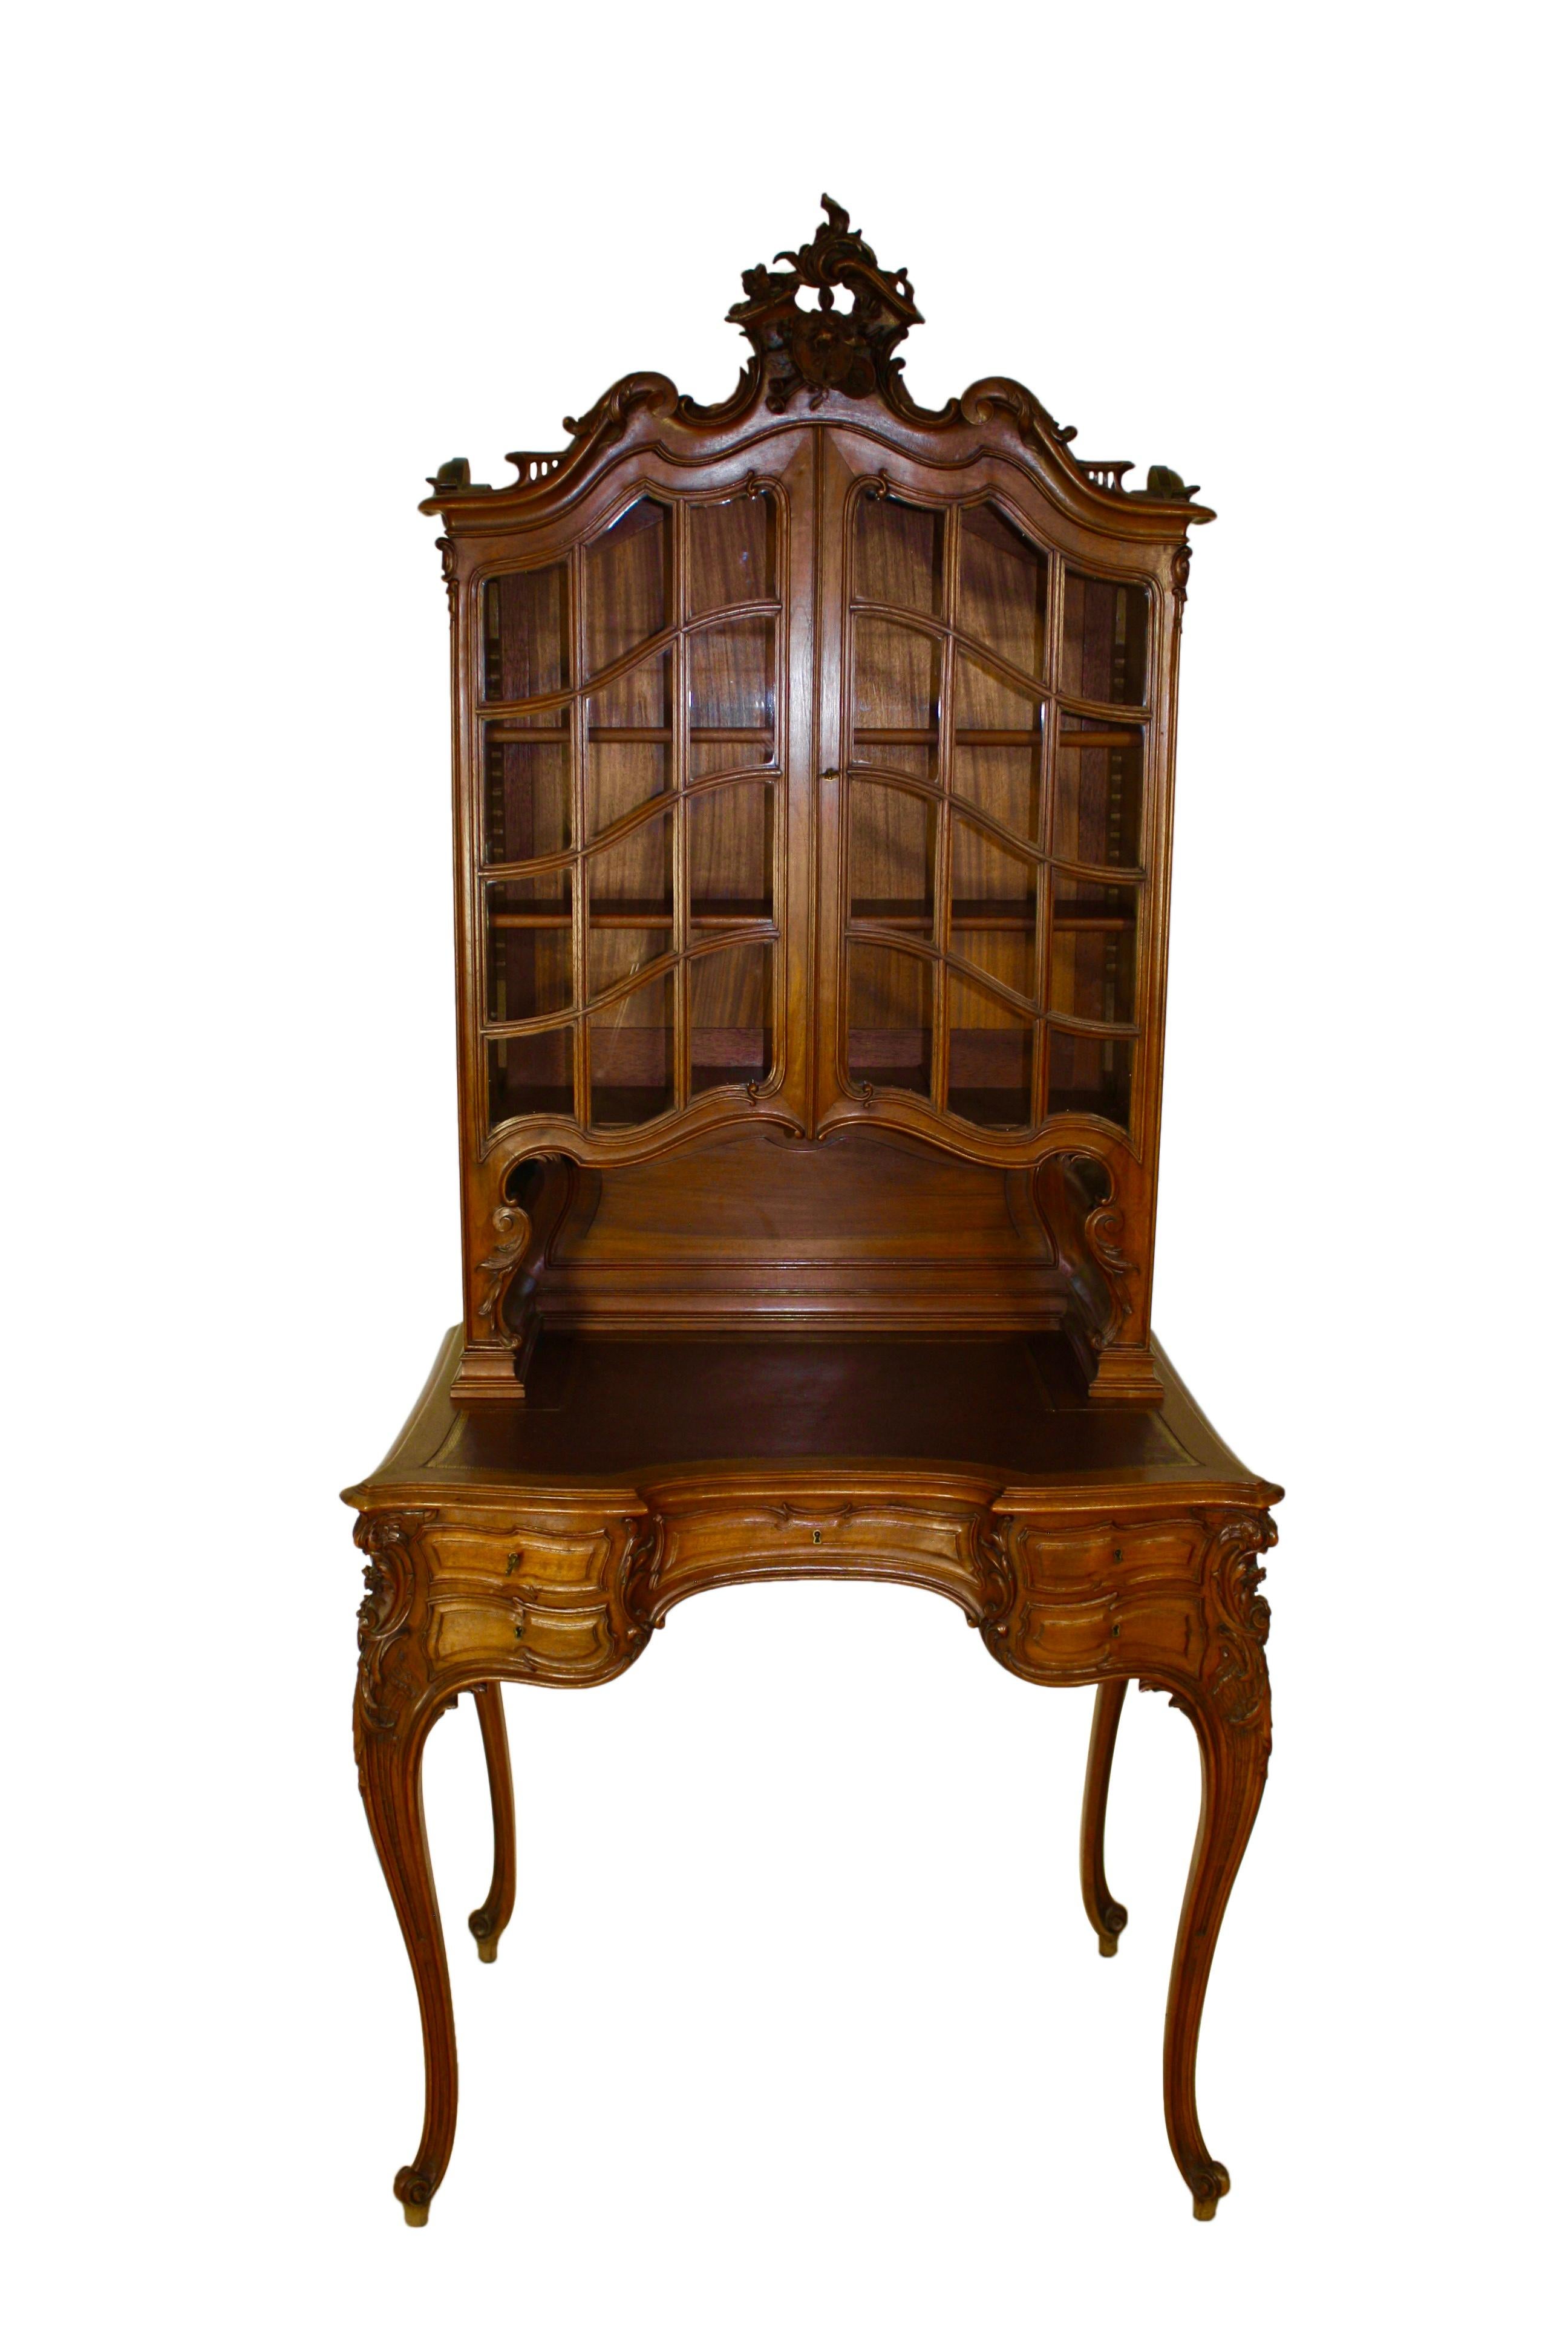 Manufactured by Mercier Frères of Paris, this elegant walnut desk features extensive, detailed carving; a top hutch with double doors and 12 glass panes in each door, opening to two removable shelves; a leather top writing surface embossed with a